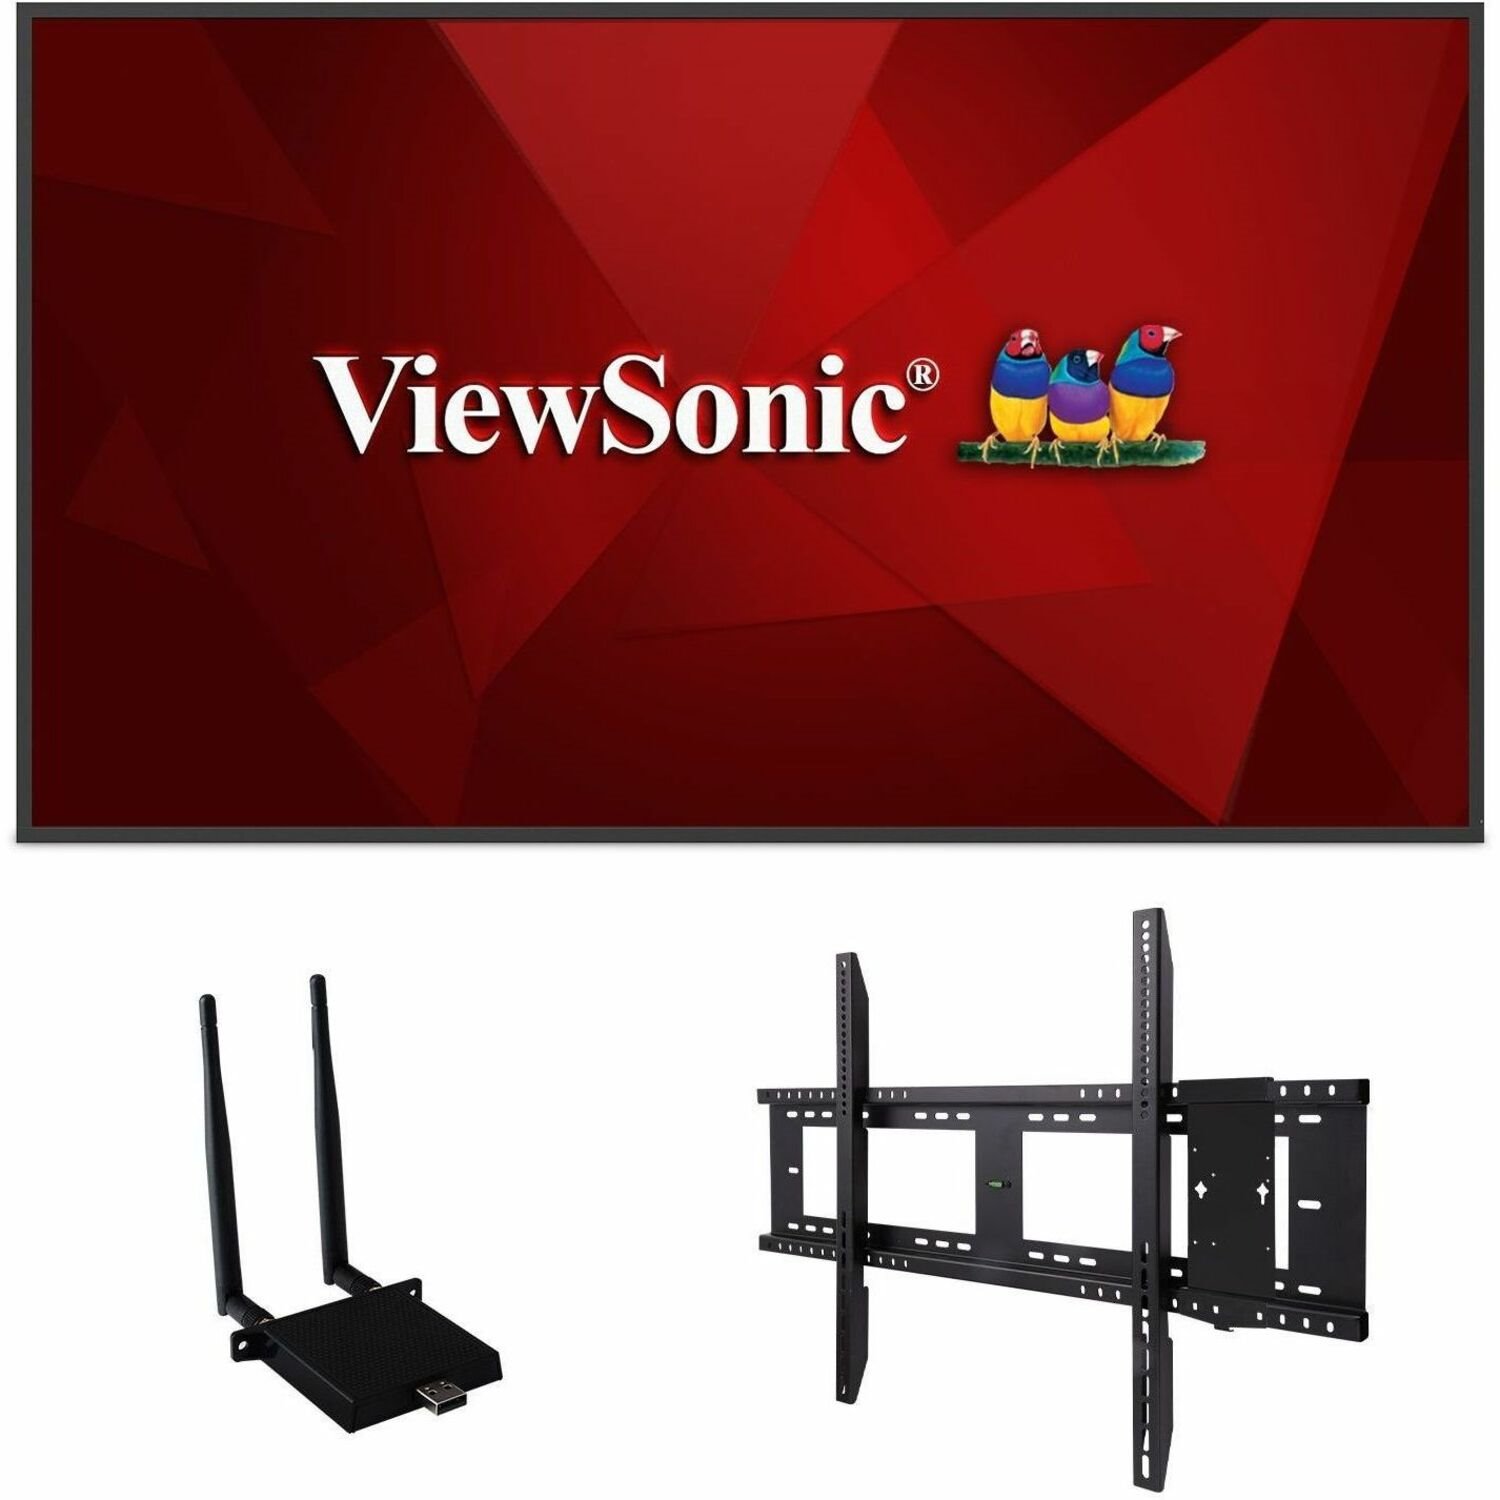 ViewSonic Commercial Display CDE6530-E1 - 4K, Integrated Software, WiFi Adapter and Fixed Wall Mount - 450 cd/m2 - 65"